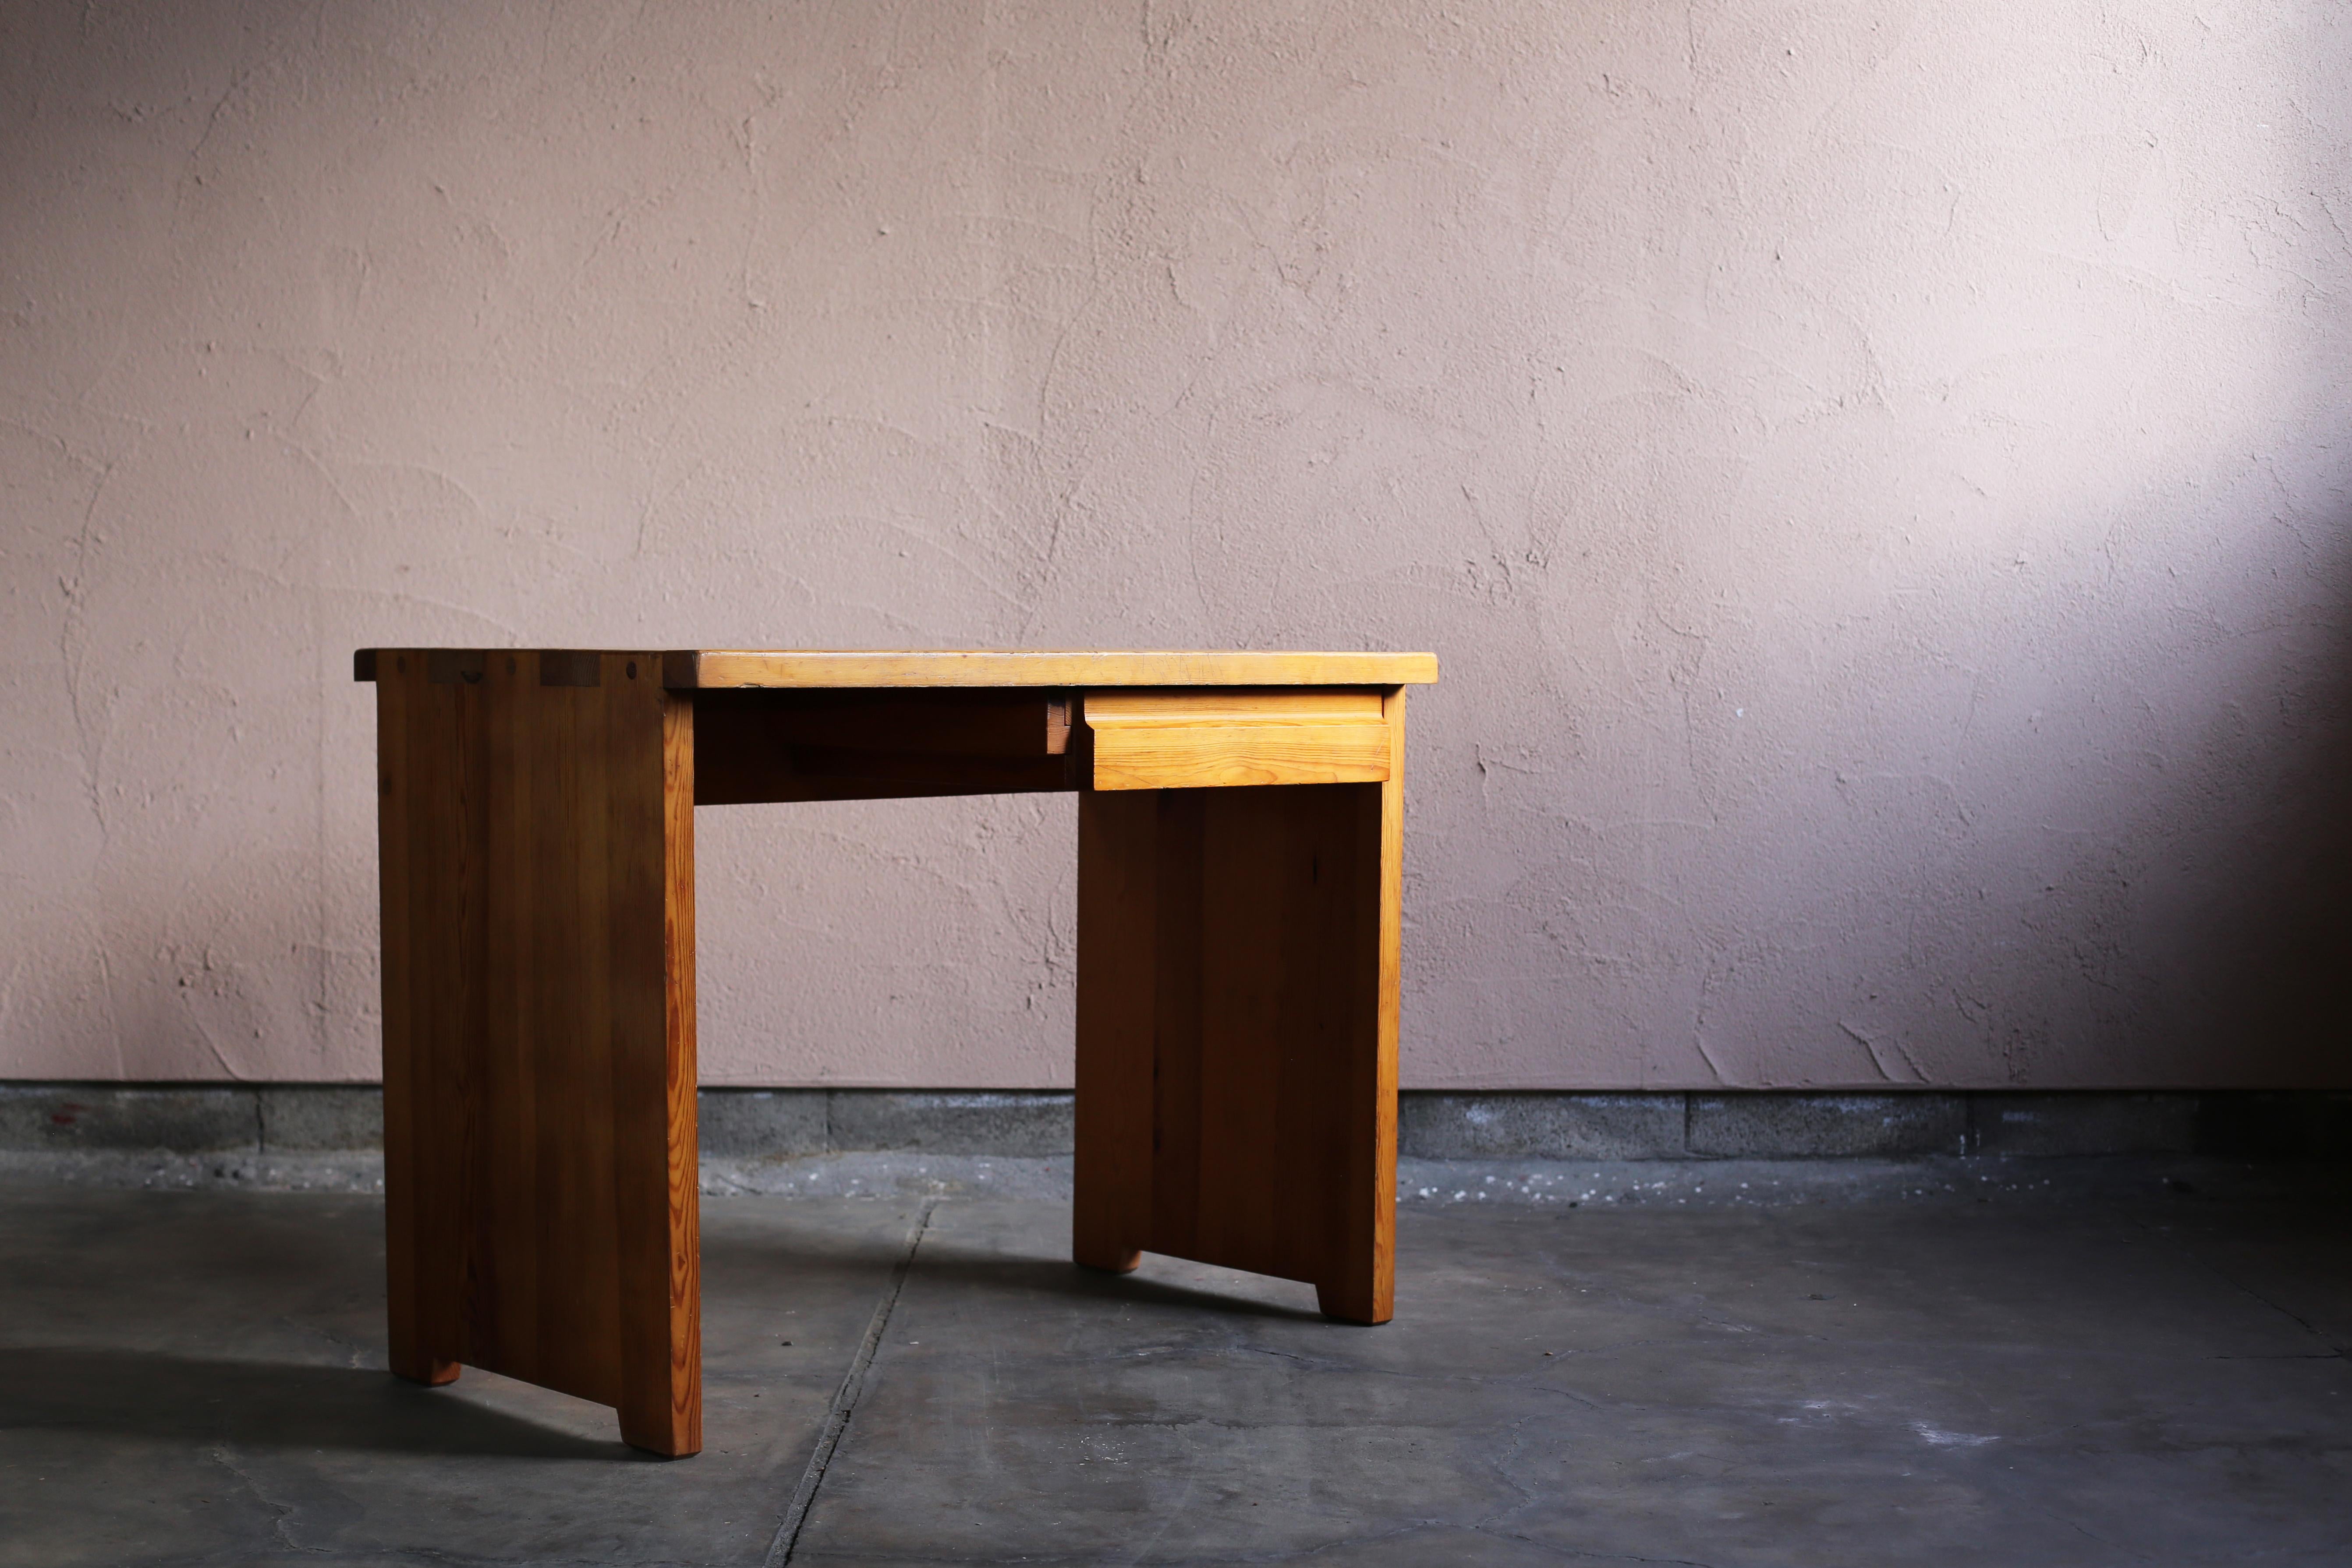 Size : W1000 D600 H750 mm ?

Vintage desk by Raymond Haeusler. It is a product made by Regain, which made products such as Charlotte Perriand and Pierre Chapo, and it seems to be very compatible with vintage products around it. Good vintage with